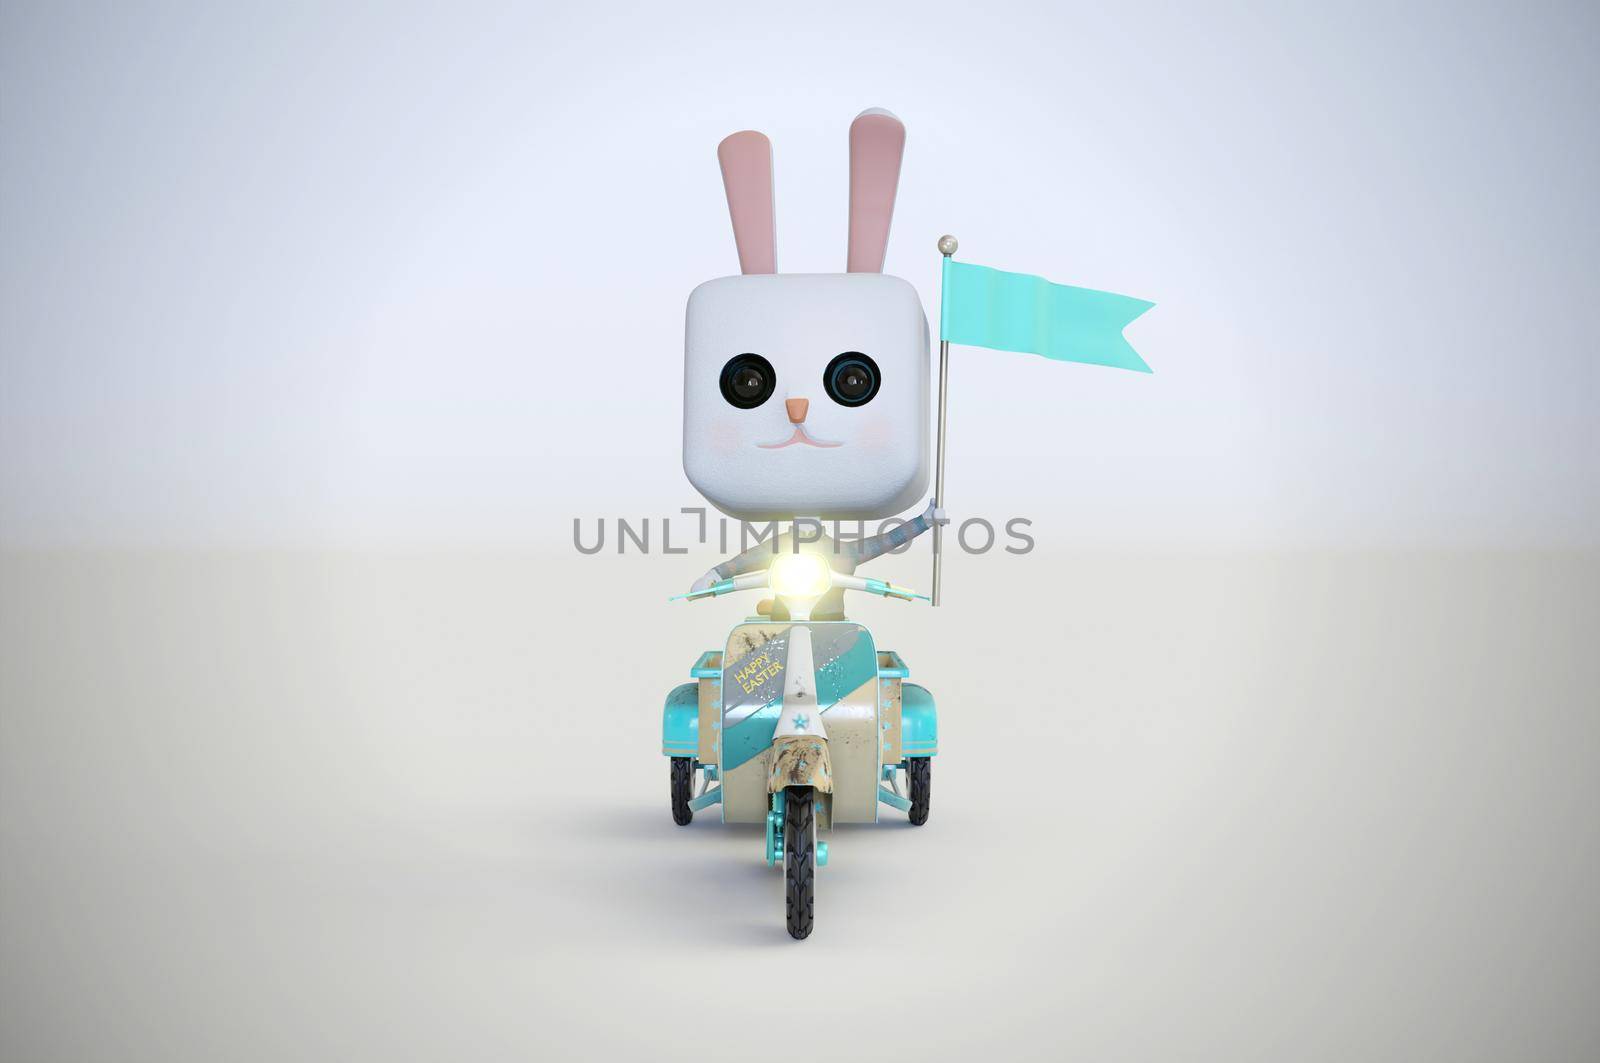 3d illustration. Easter bunny Rabbit riding a scooter .